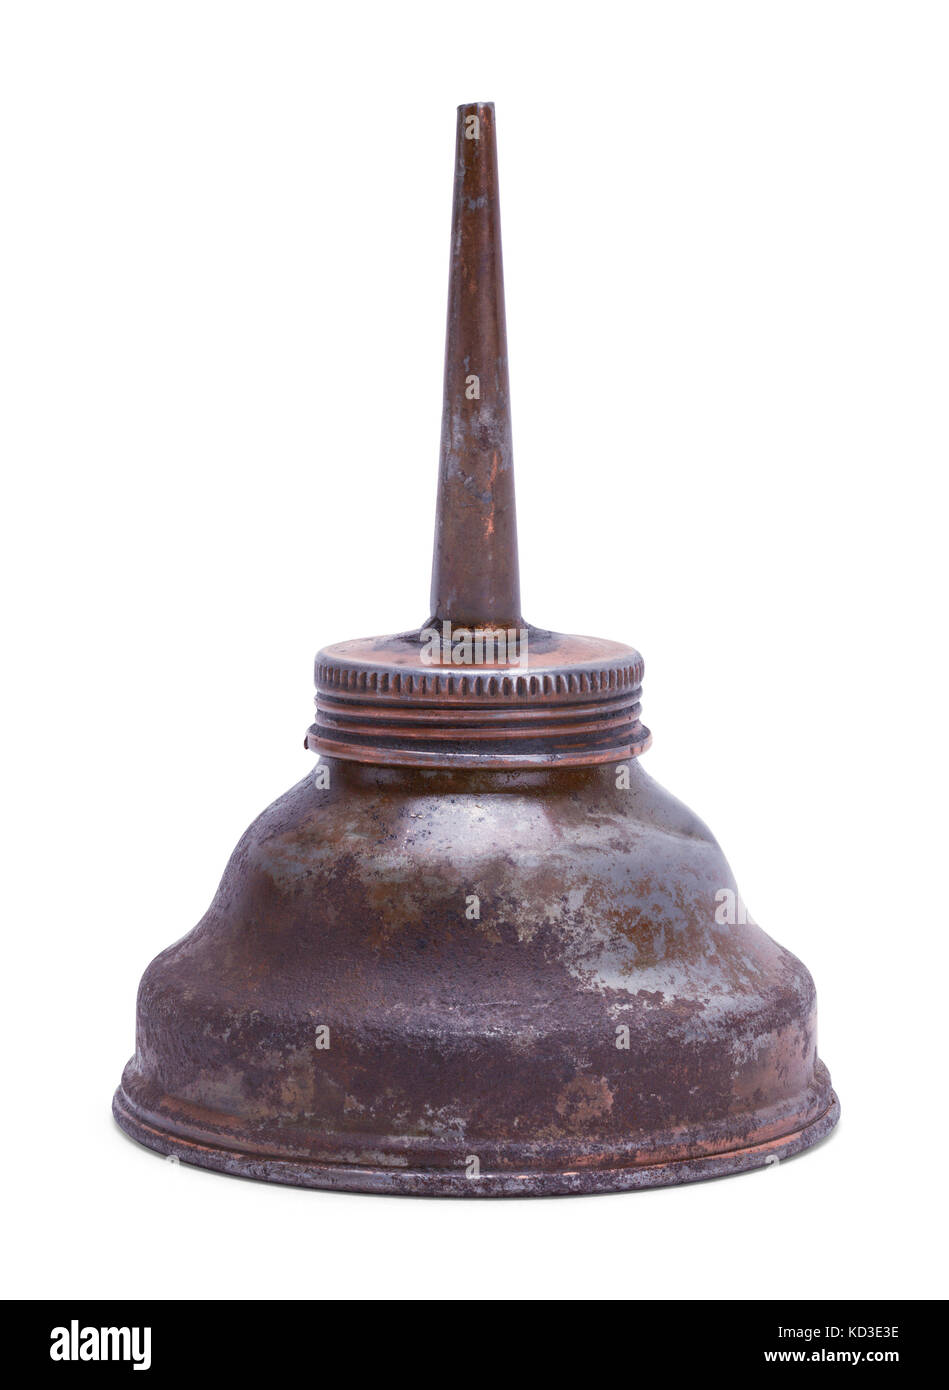 Old Used Oil Can Isolated on a White Background. Stock Photo